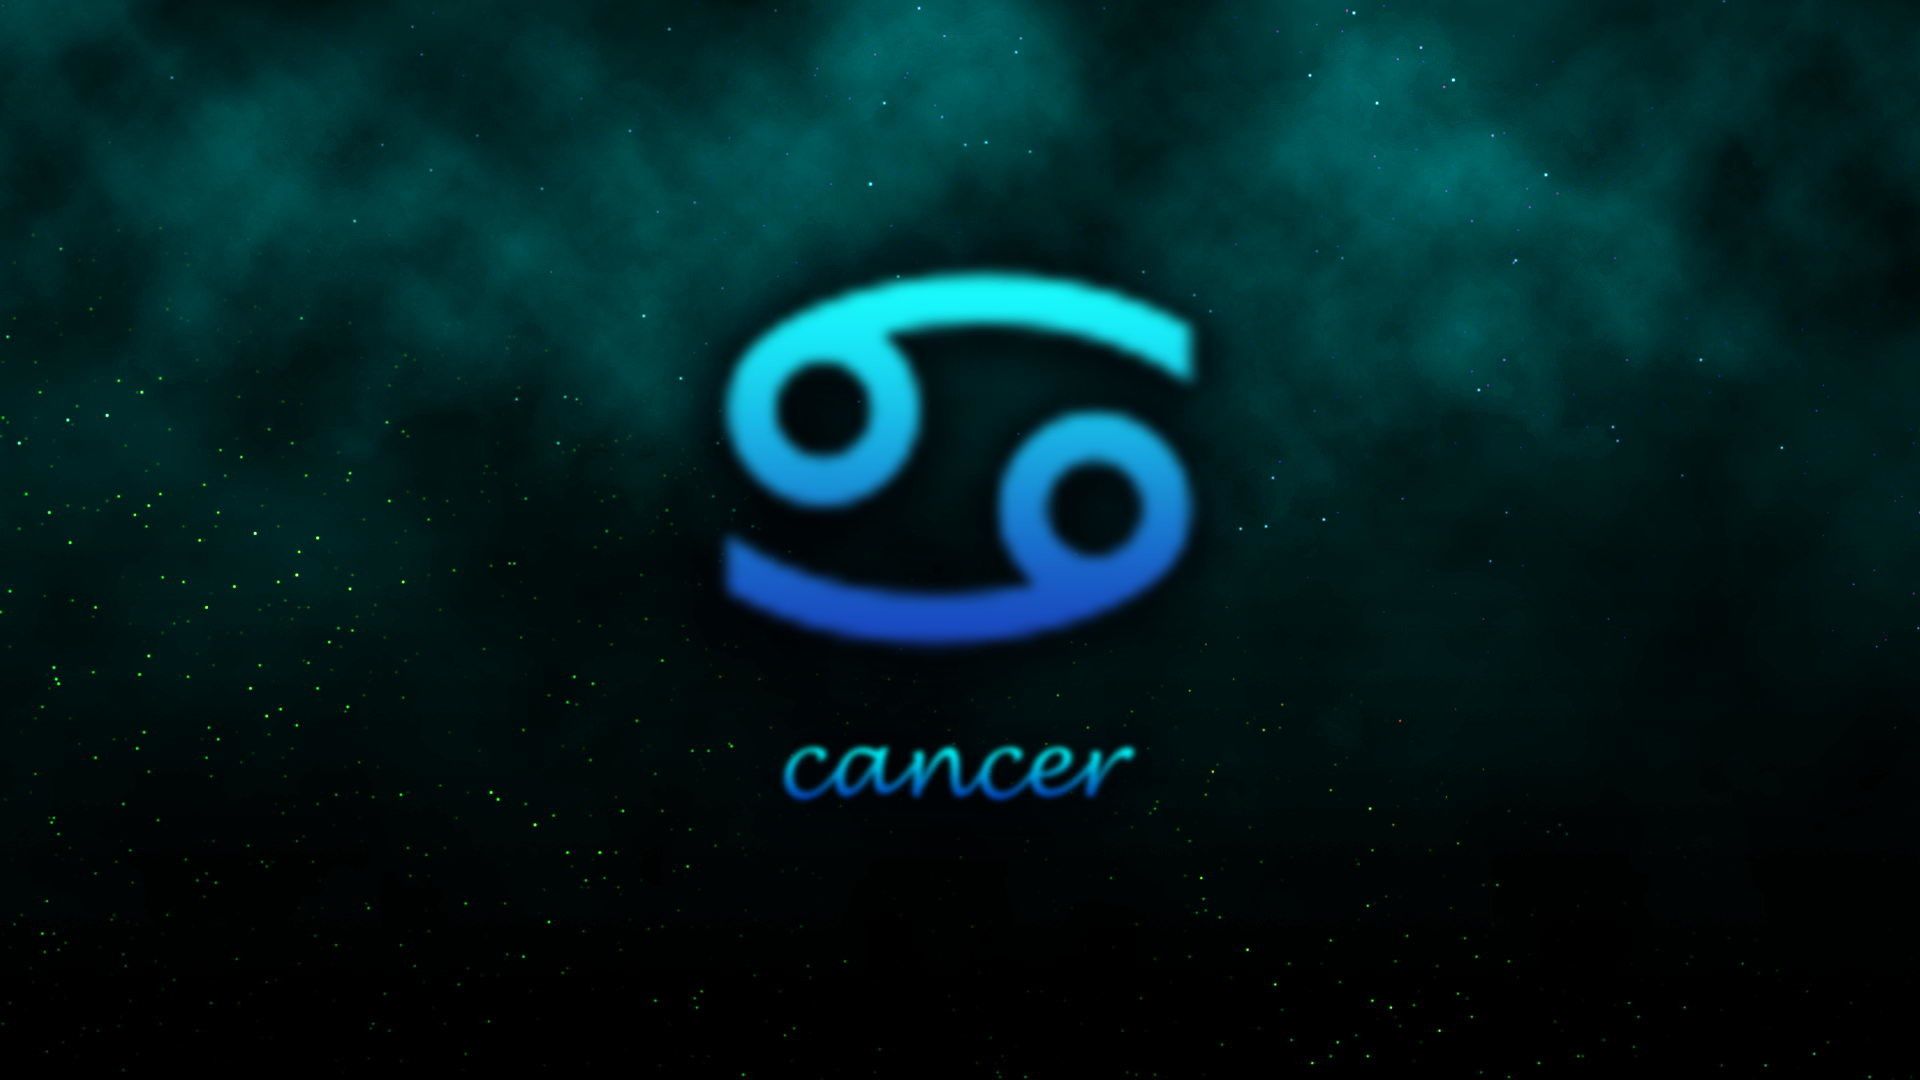 Cancer Wallpaper. Hope Cancer Wallpaper, Unique Cancer Awareness Background and Cancer Zodiac Sign Wallpaper